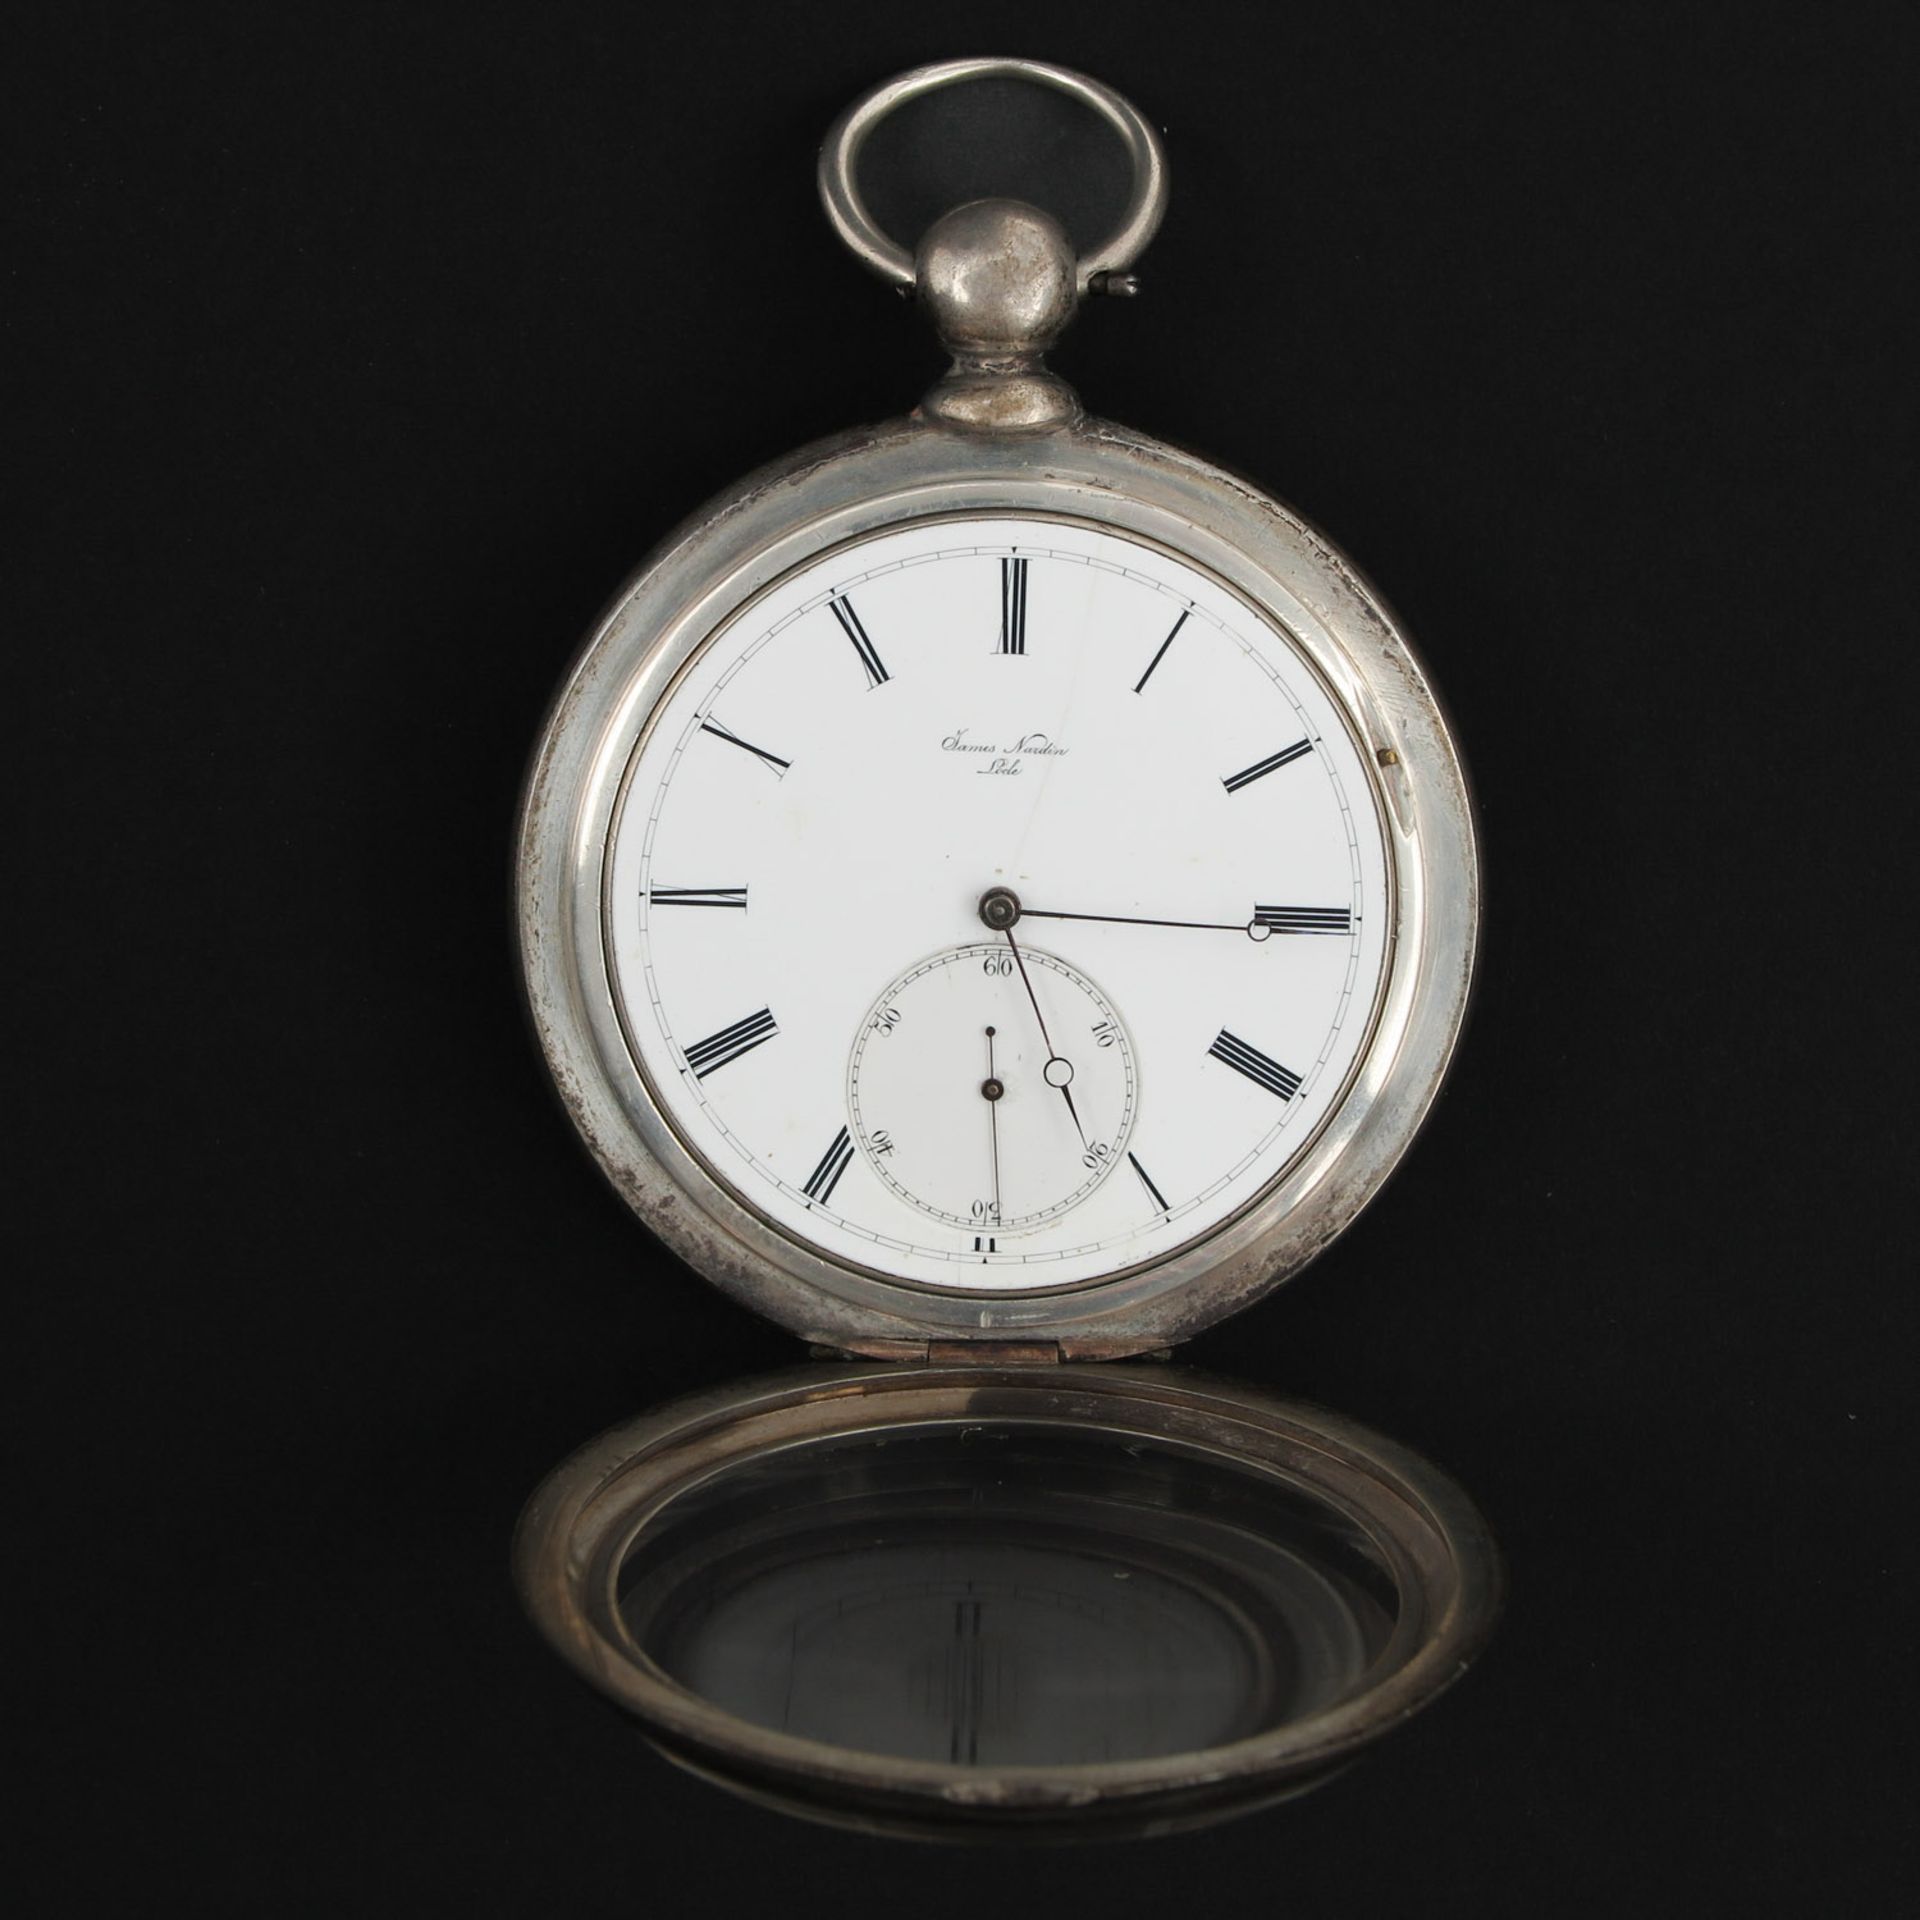 A James Nardin Locle Pocket Watch - Image 3 of 7